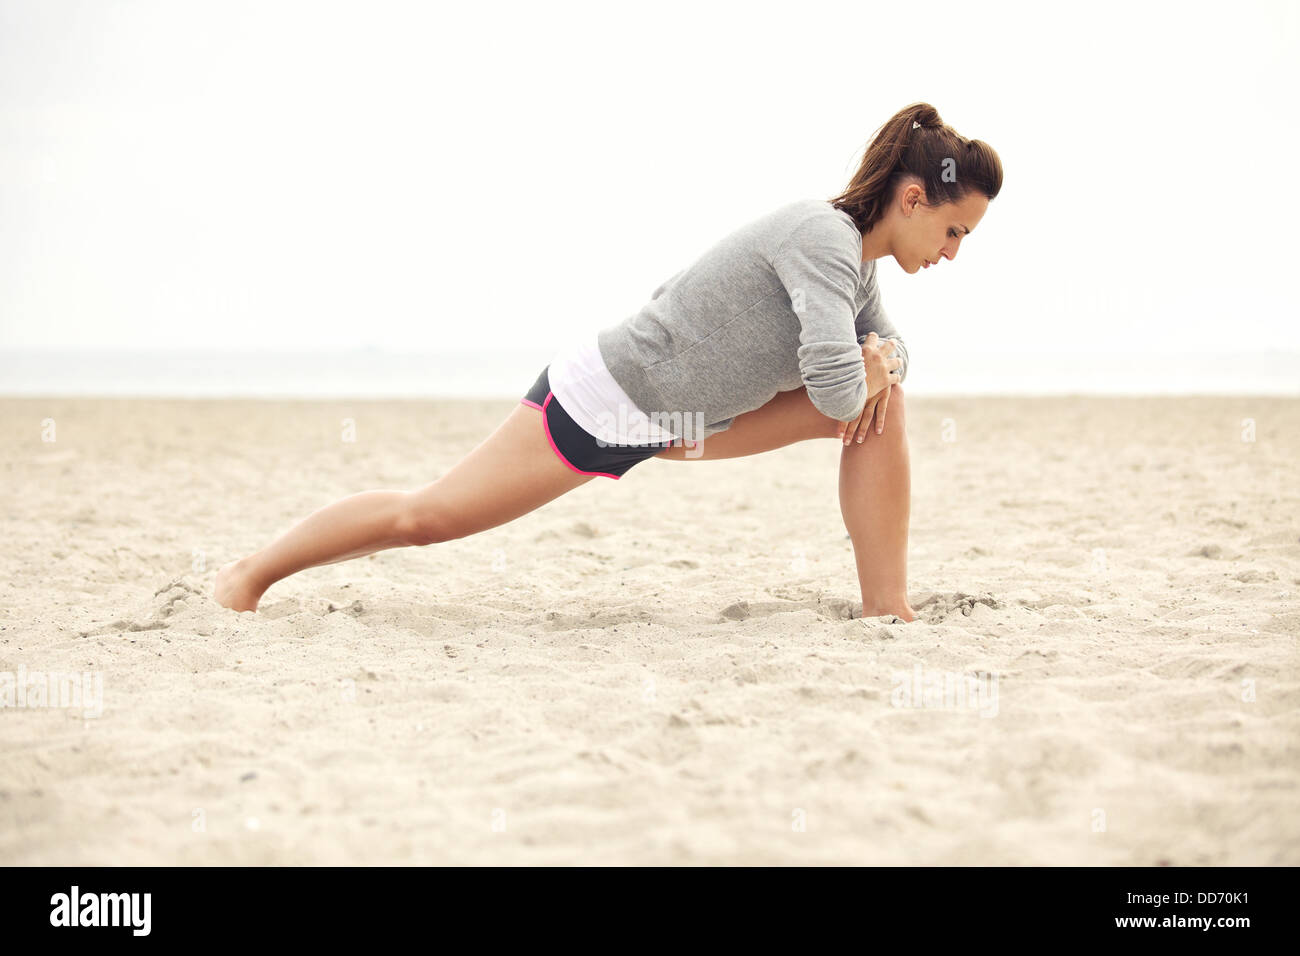 Young female athlete doing stretching exercise on the beach for fitness and a healthy lifestyle. Stock Photo